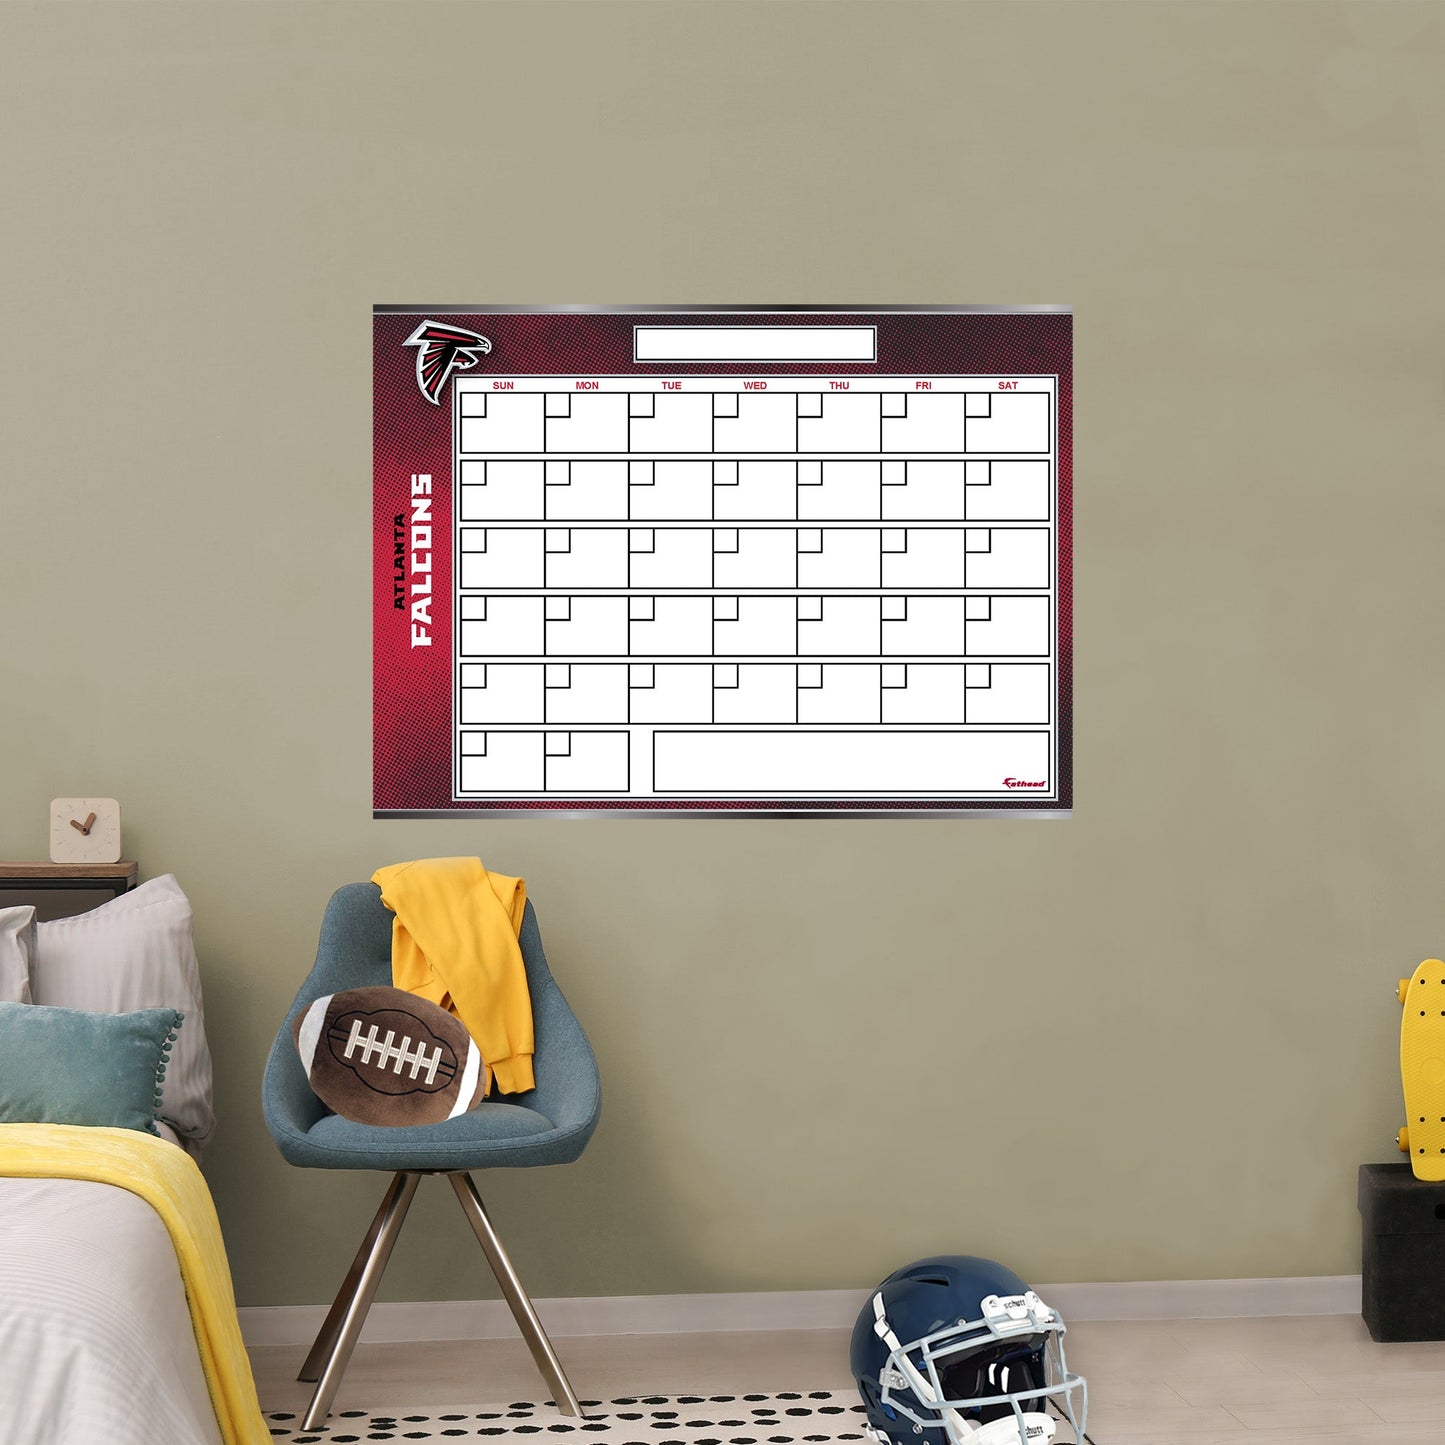 Atlanta Falcons: Dry Erase Calendar - Officially Licensed NFL Removable Adhesive Decal